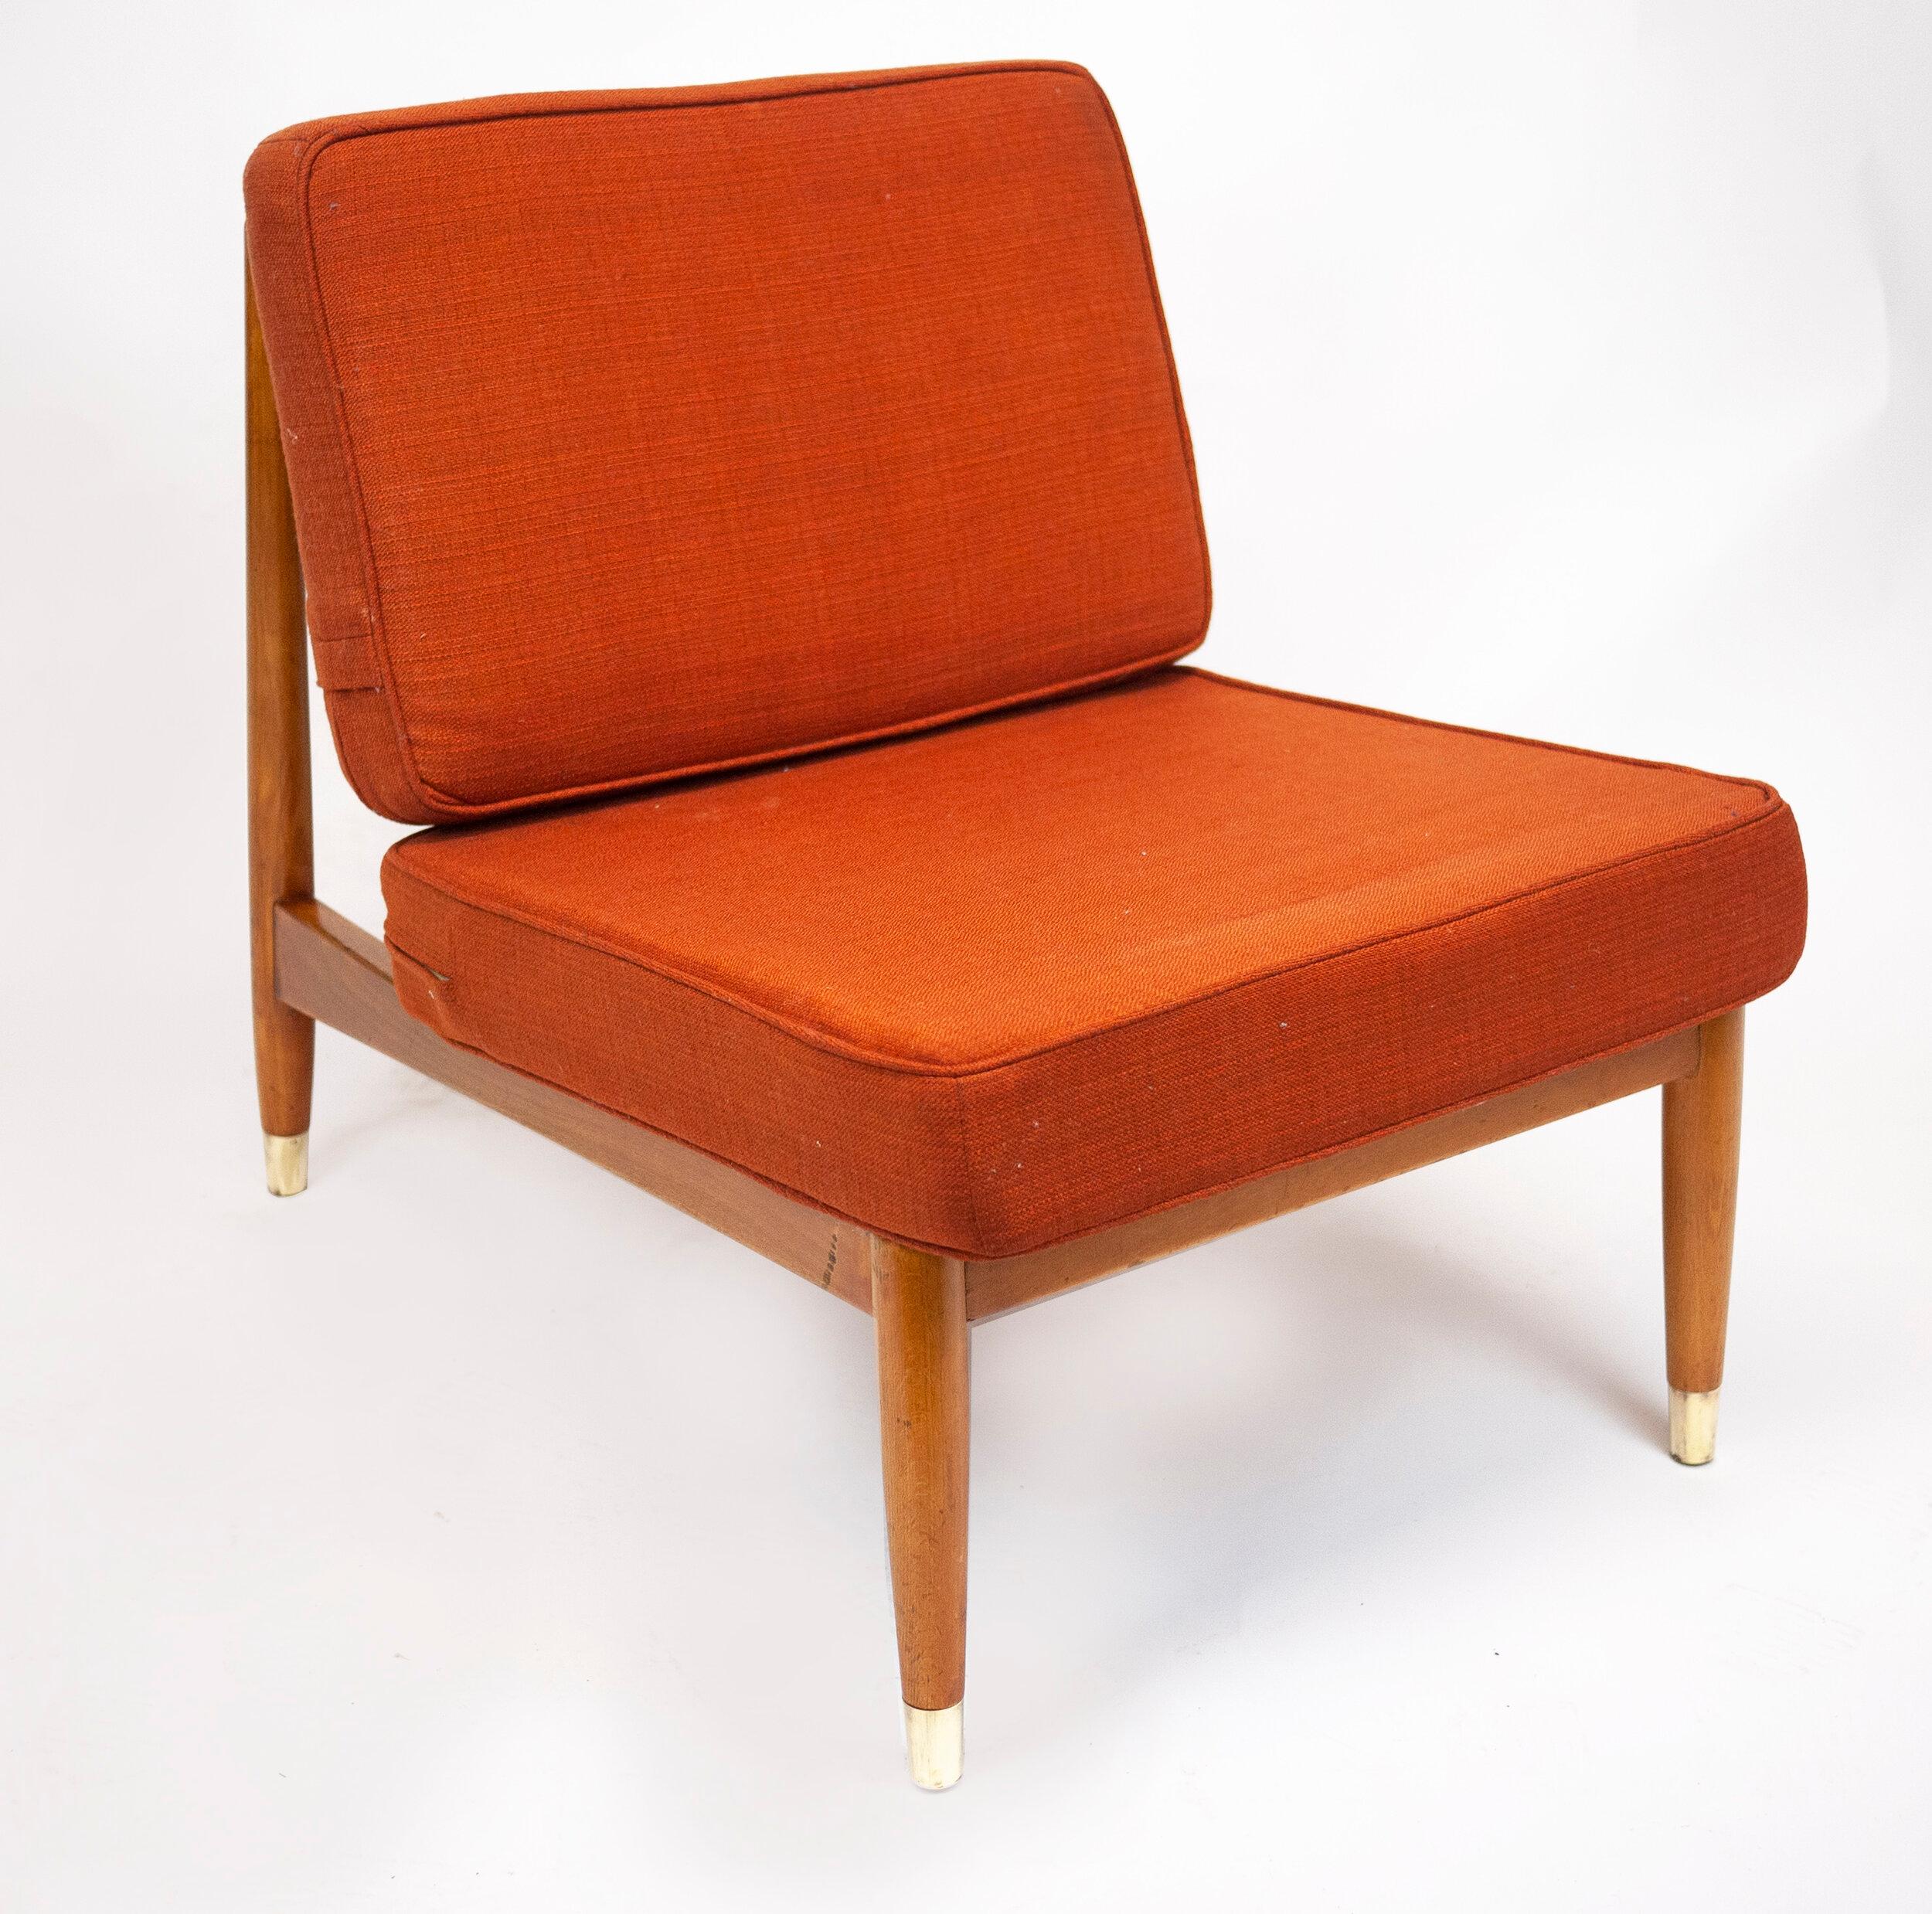 A beech lounge chair in original orange fabric by Folke Ohlsson.

Manufacturer - Dux

Designer - Folke Ohlsson

Design Period - 1960 to 1969

Style - Vintage, Mid-Century

Detailed Condition - Good

Restoration and Damage Details - Beech has been